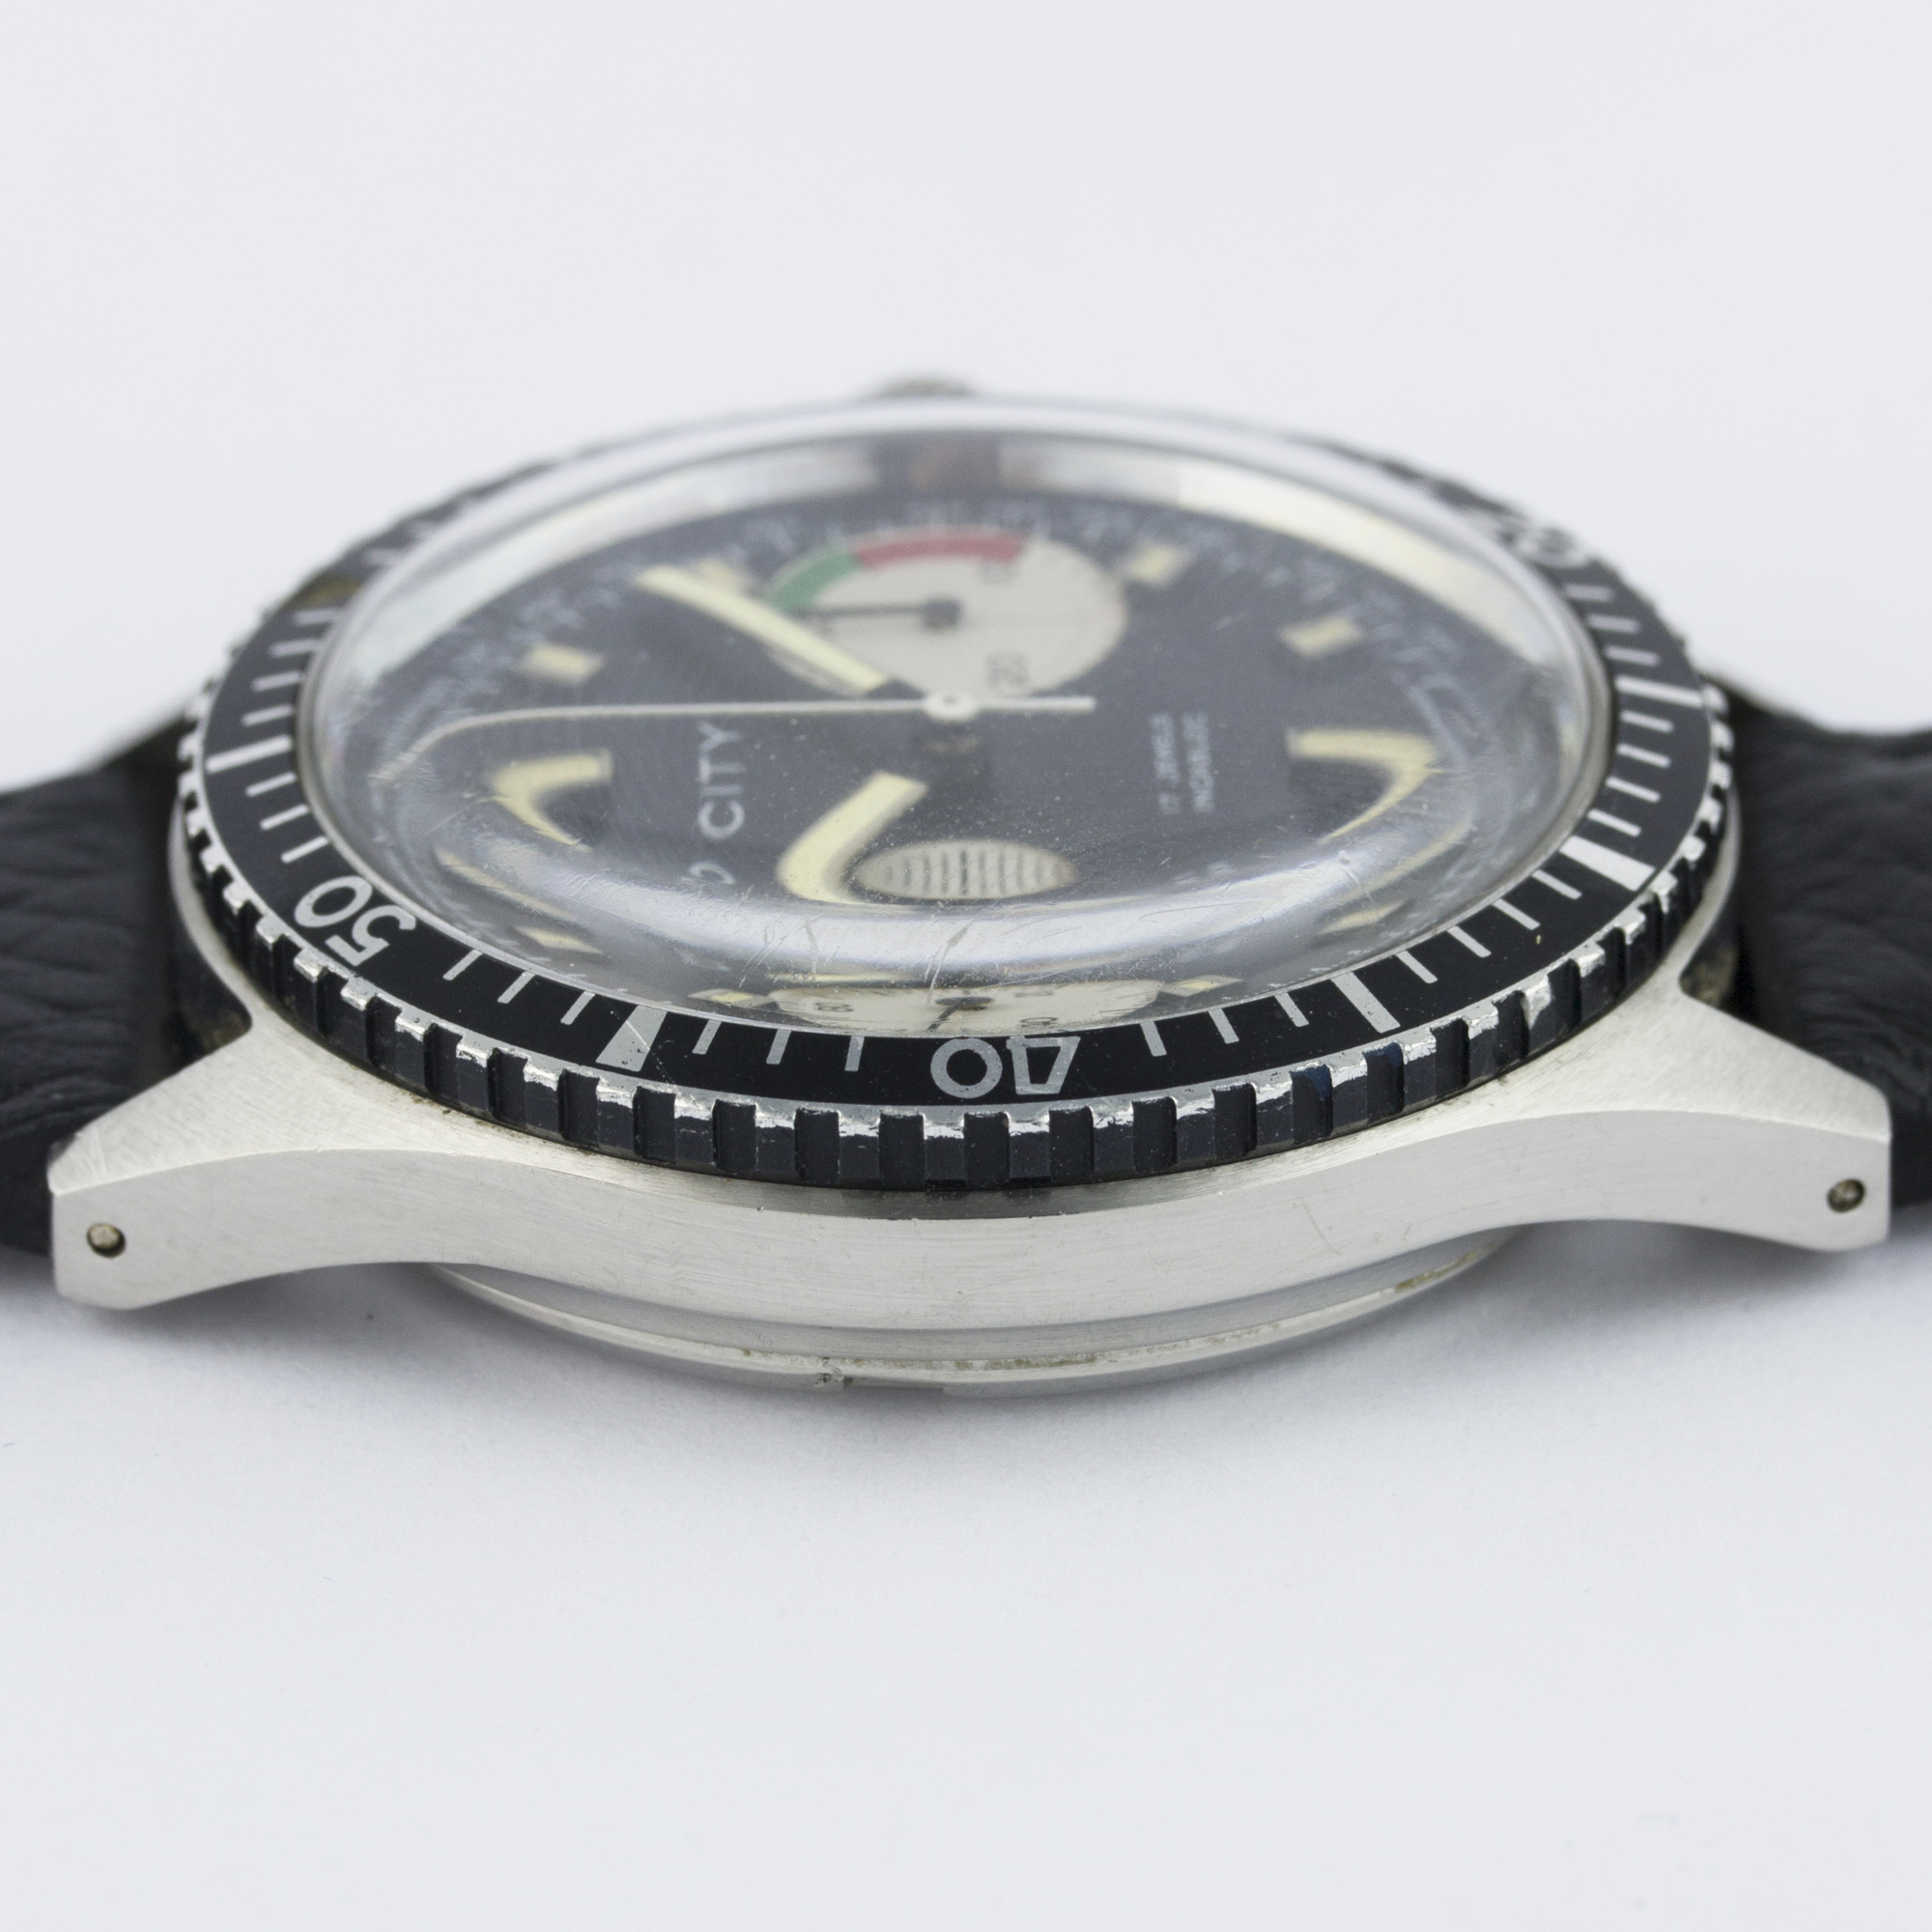 A GENTLEMAN’S STAINLESS STEEL CITY CHRONOGRAPH WRIST WATCH CIRCA 1970s D: Black dial with luminous - Image 10 of 10